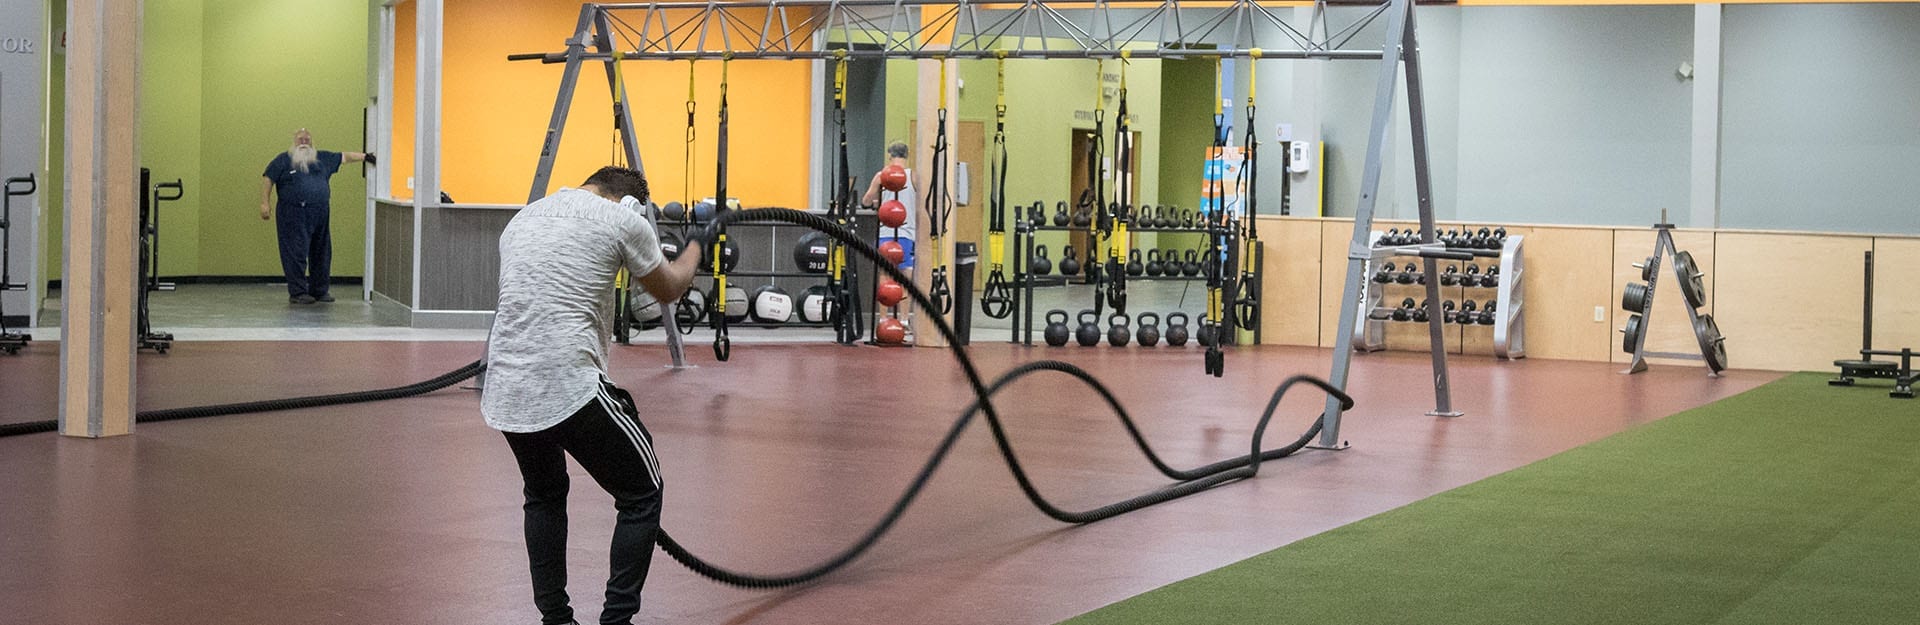 functional training equipment being used by gym member